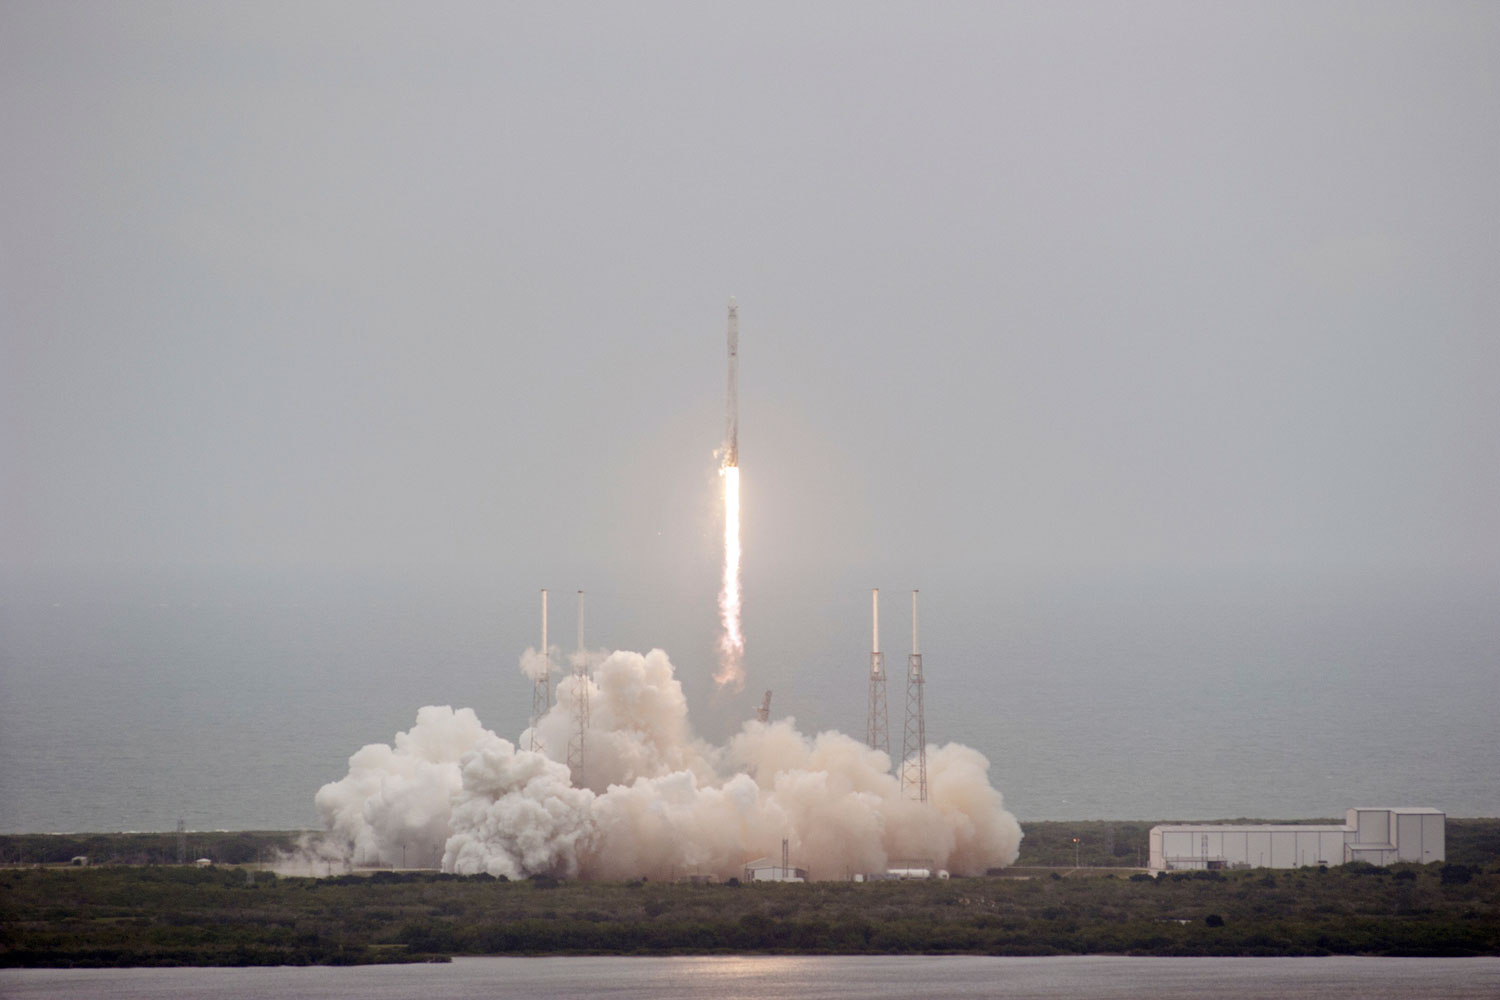 The unmanned Falcon 9 rocket blasts off from Cape Canaveral Air Force Station in Cape Canaveral, Fla., on April 18, 2014.